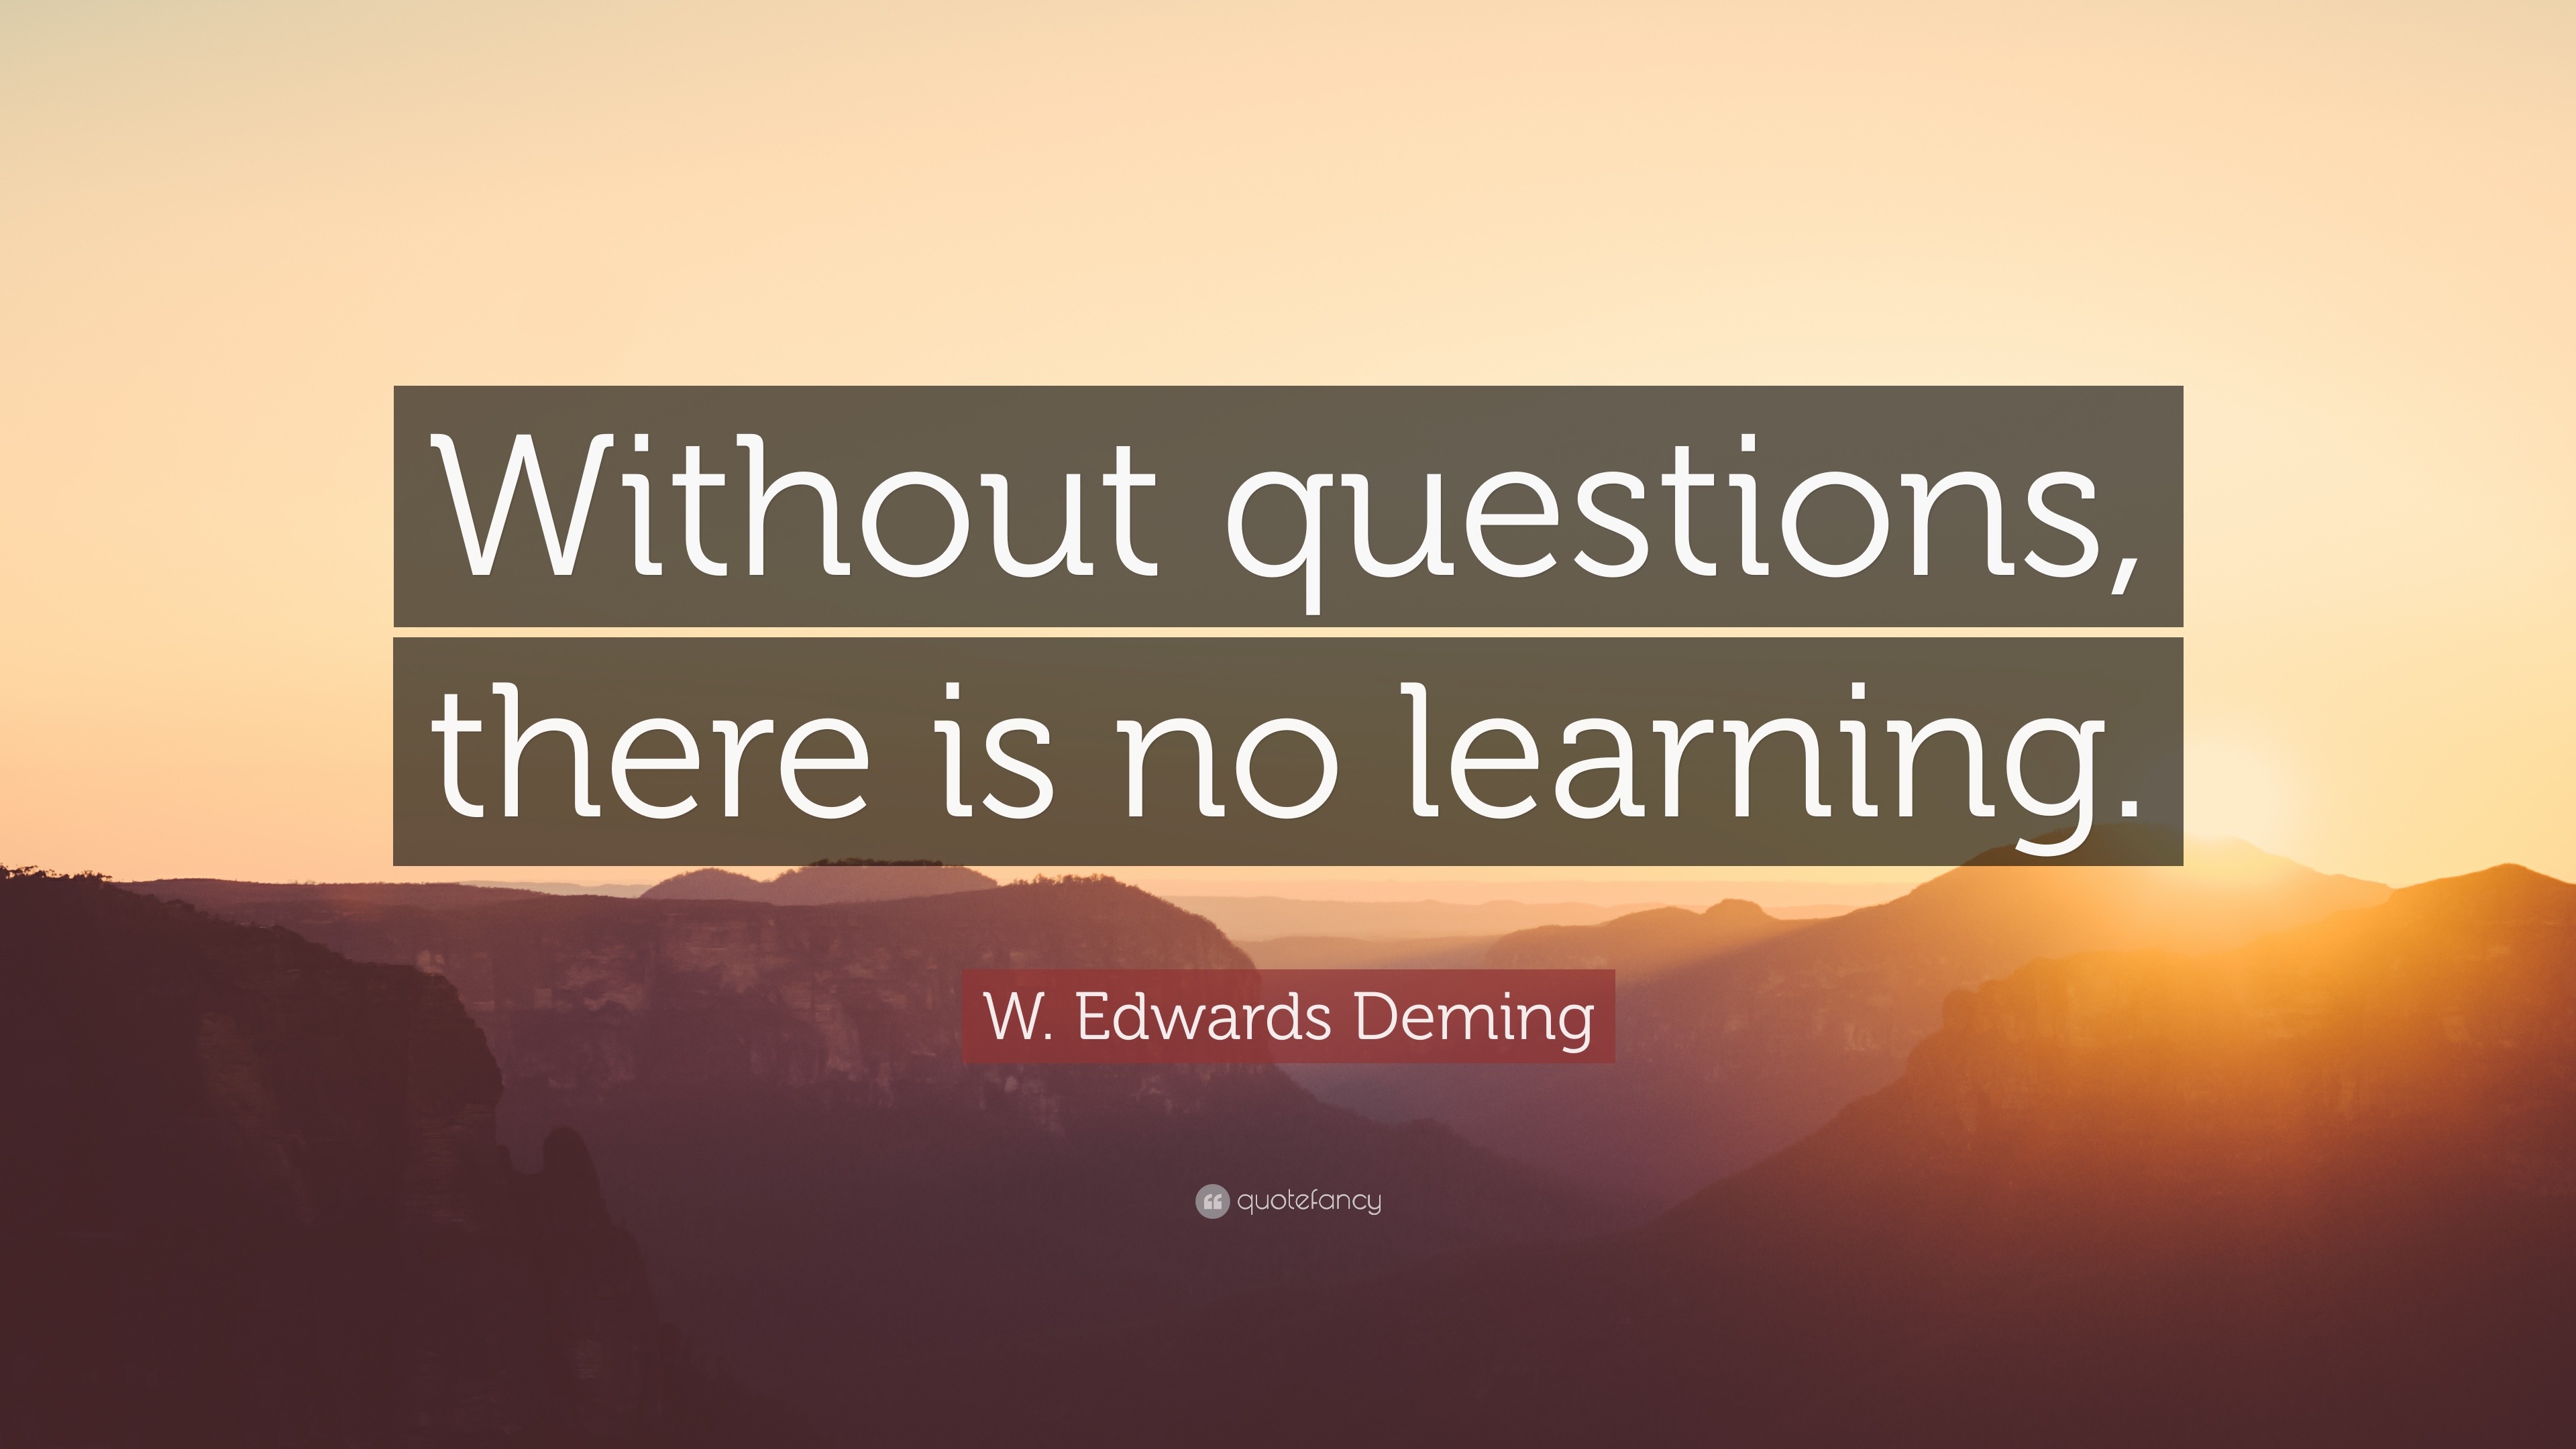 https://quotefancy.com/media/wallpaper/3840x2160/612300-W-Edwards-Deming-Quote-Without-questions-there-is-no-learning.jpg